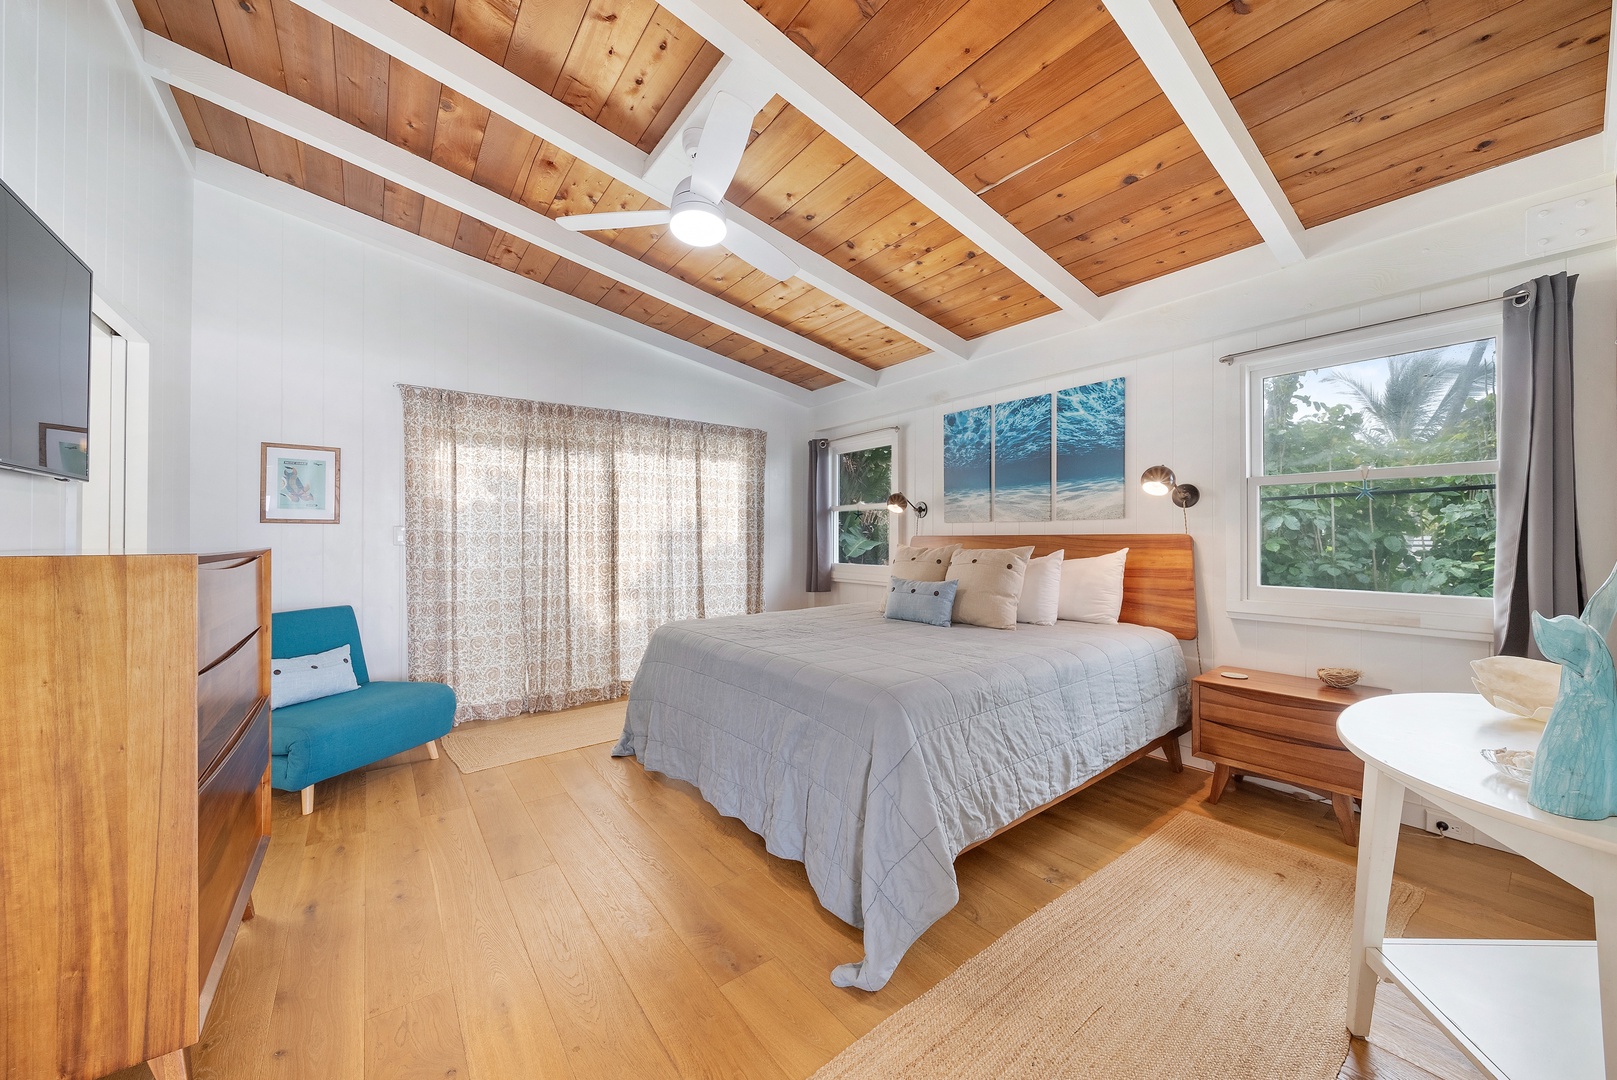 Haleiwa Vacation Rentals, Surfer's Paradise - The primary bedroom with California king and a fold-out chair that coverts into a sleeping space for 1 child